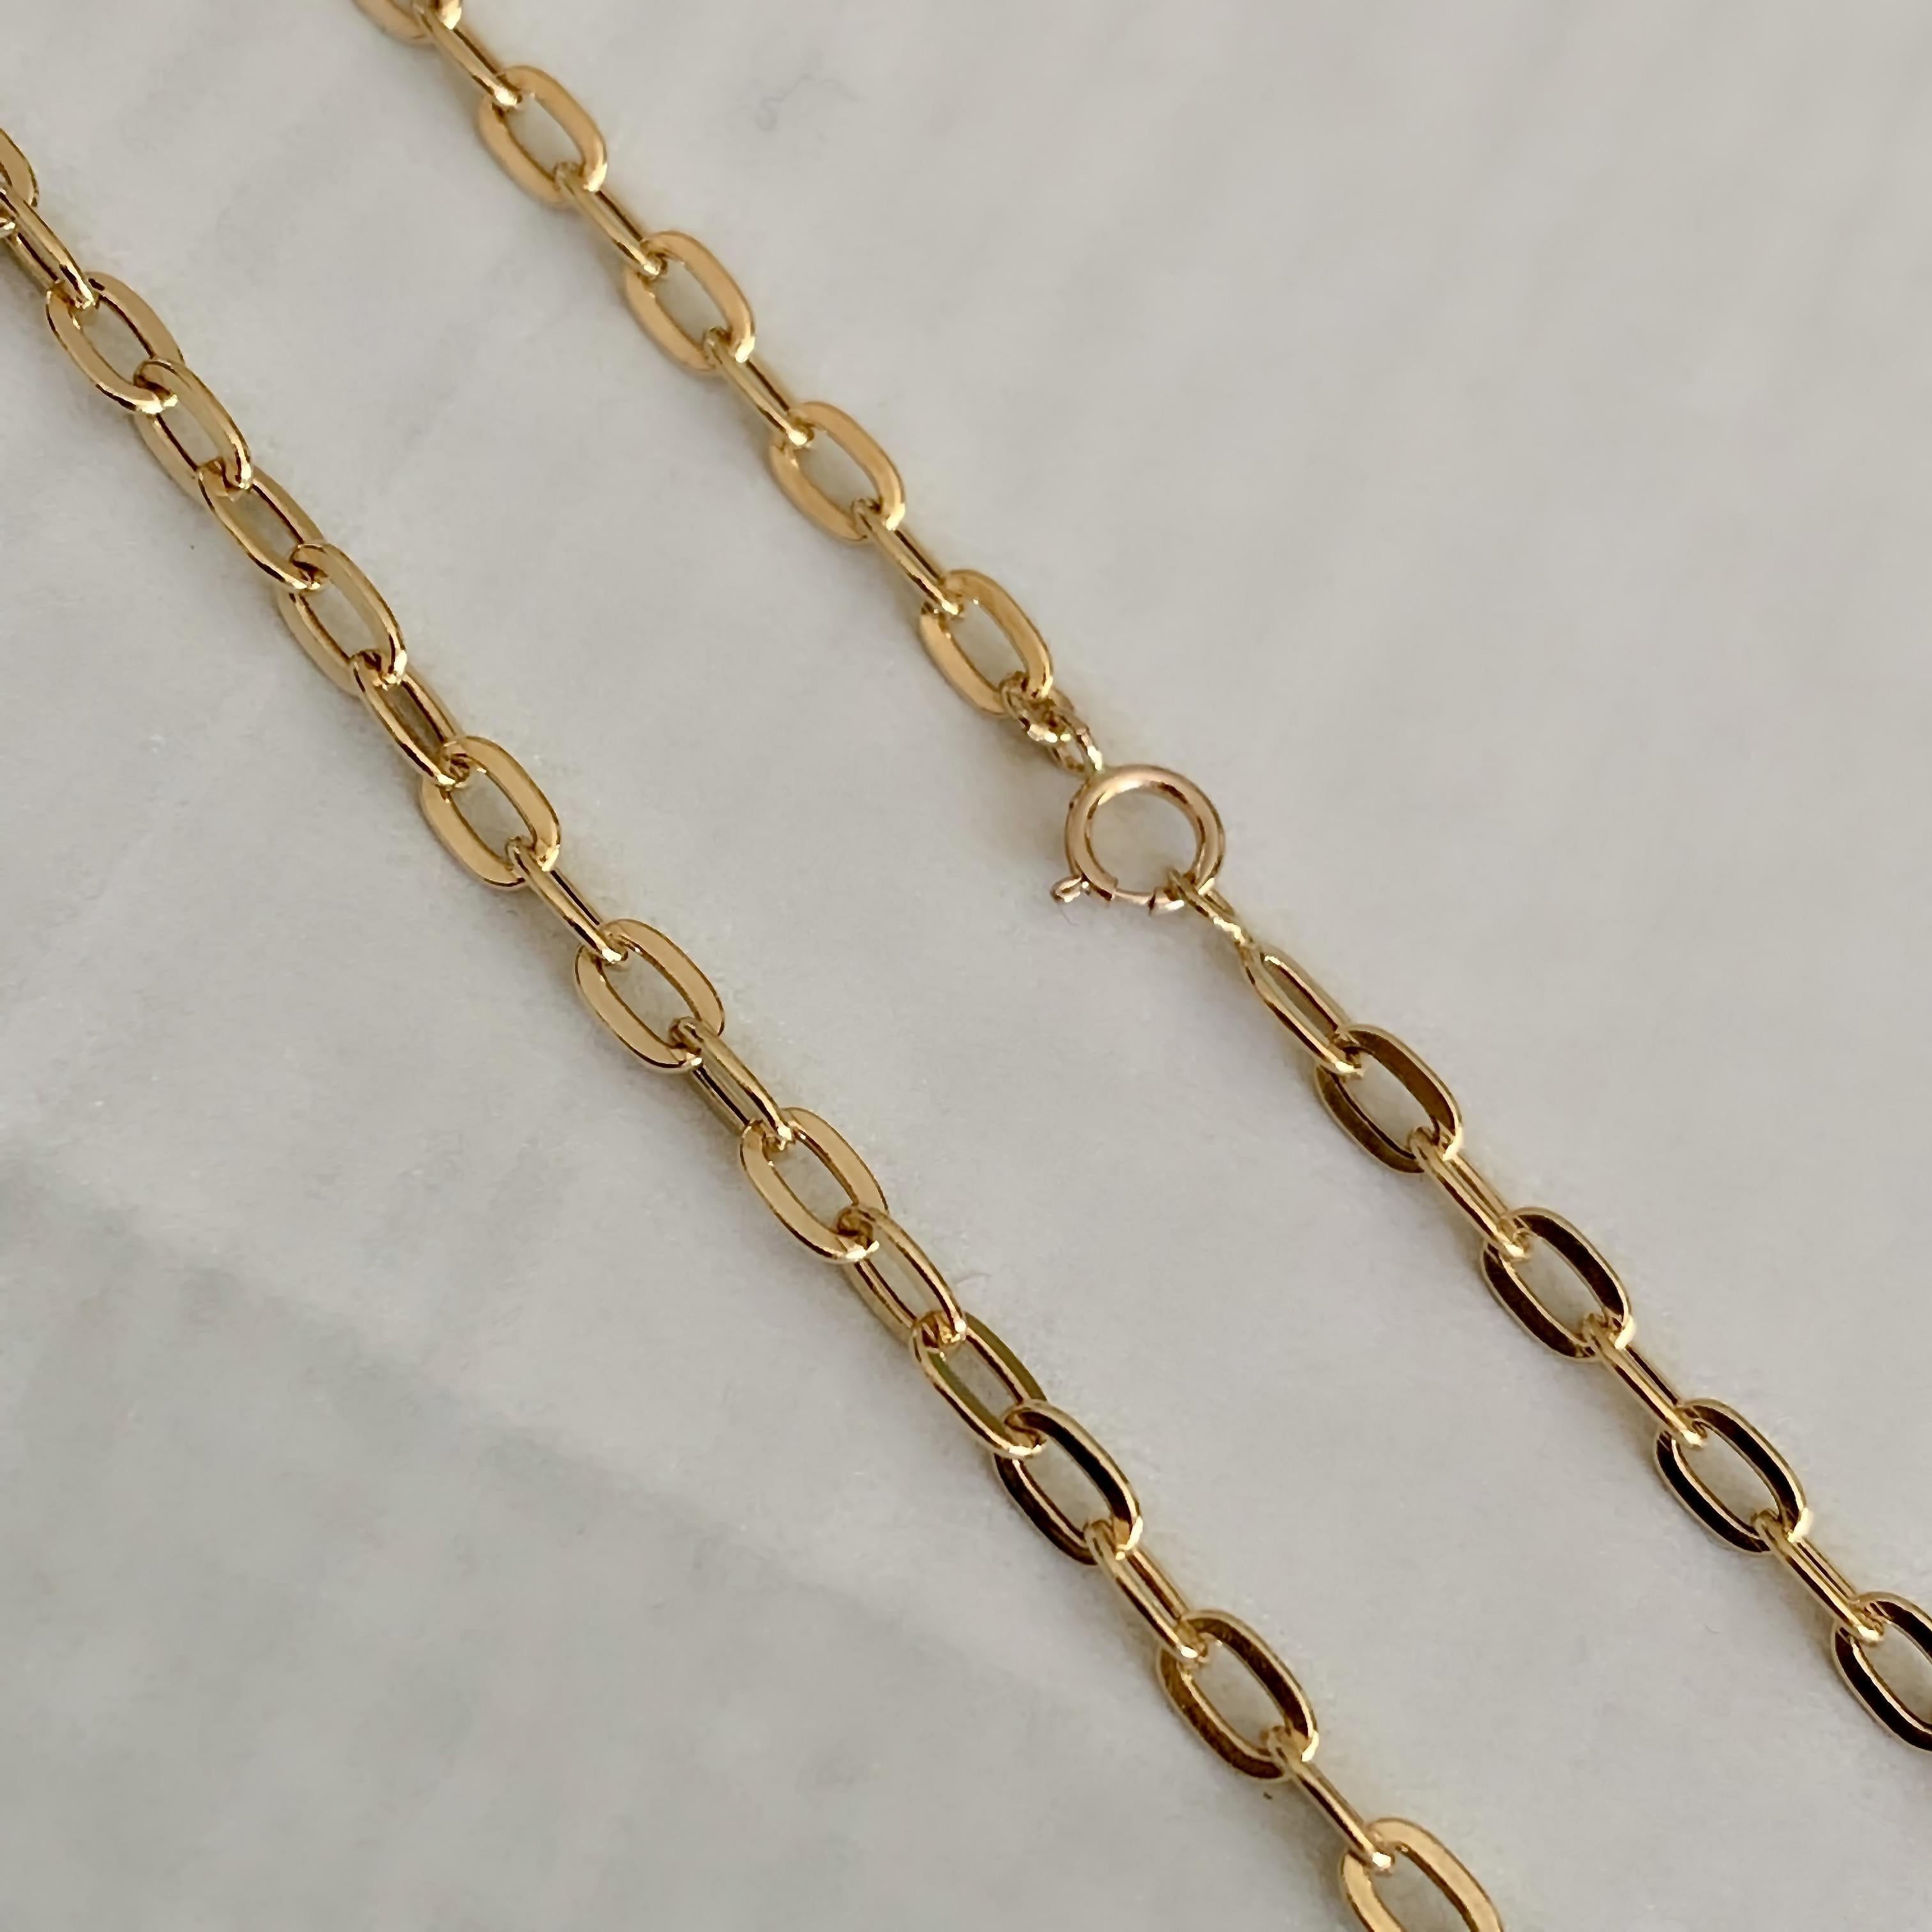 Contemporary 18 Karat Solid Yellow Gold Link Chain Choker/Necklace